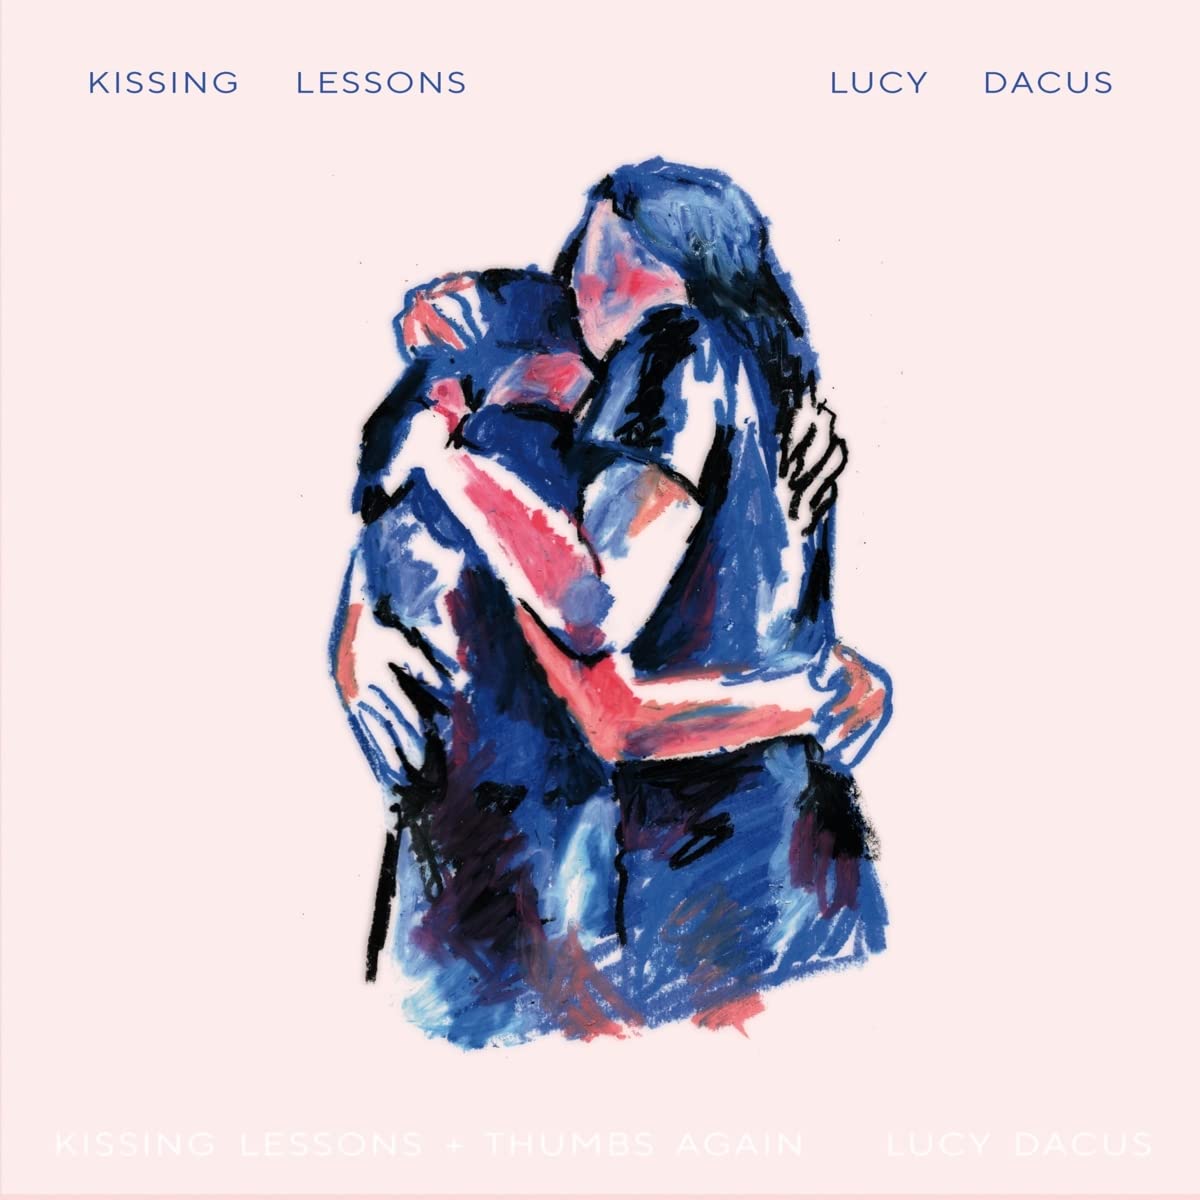 LUCY DACUS - KISSING LESSONS + THUMBS AGAIN Vinyl 7"